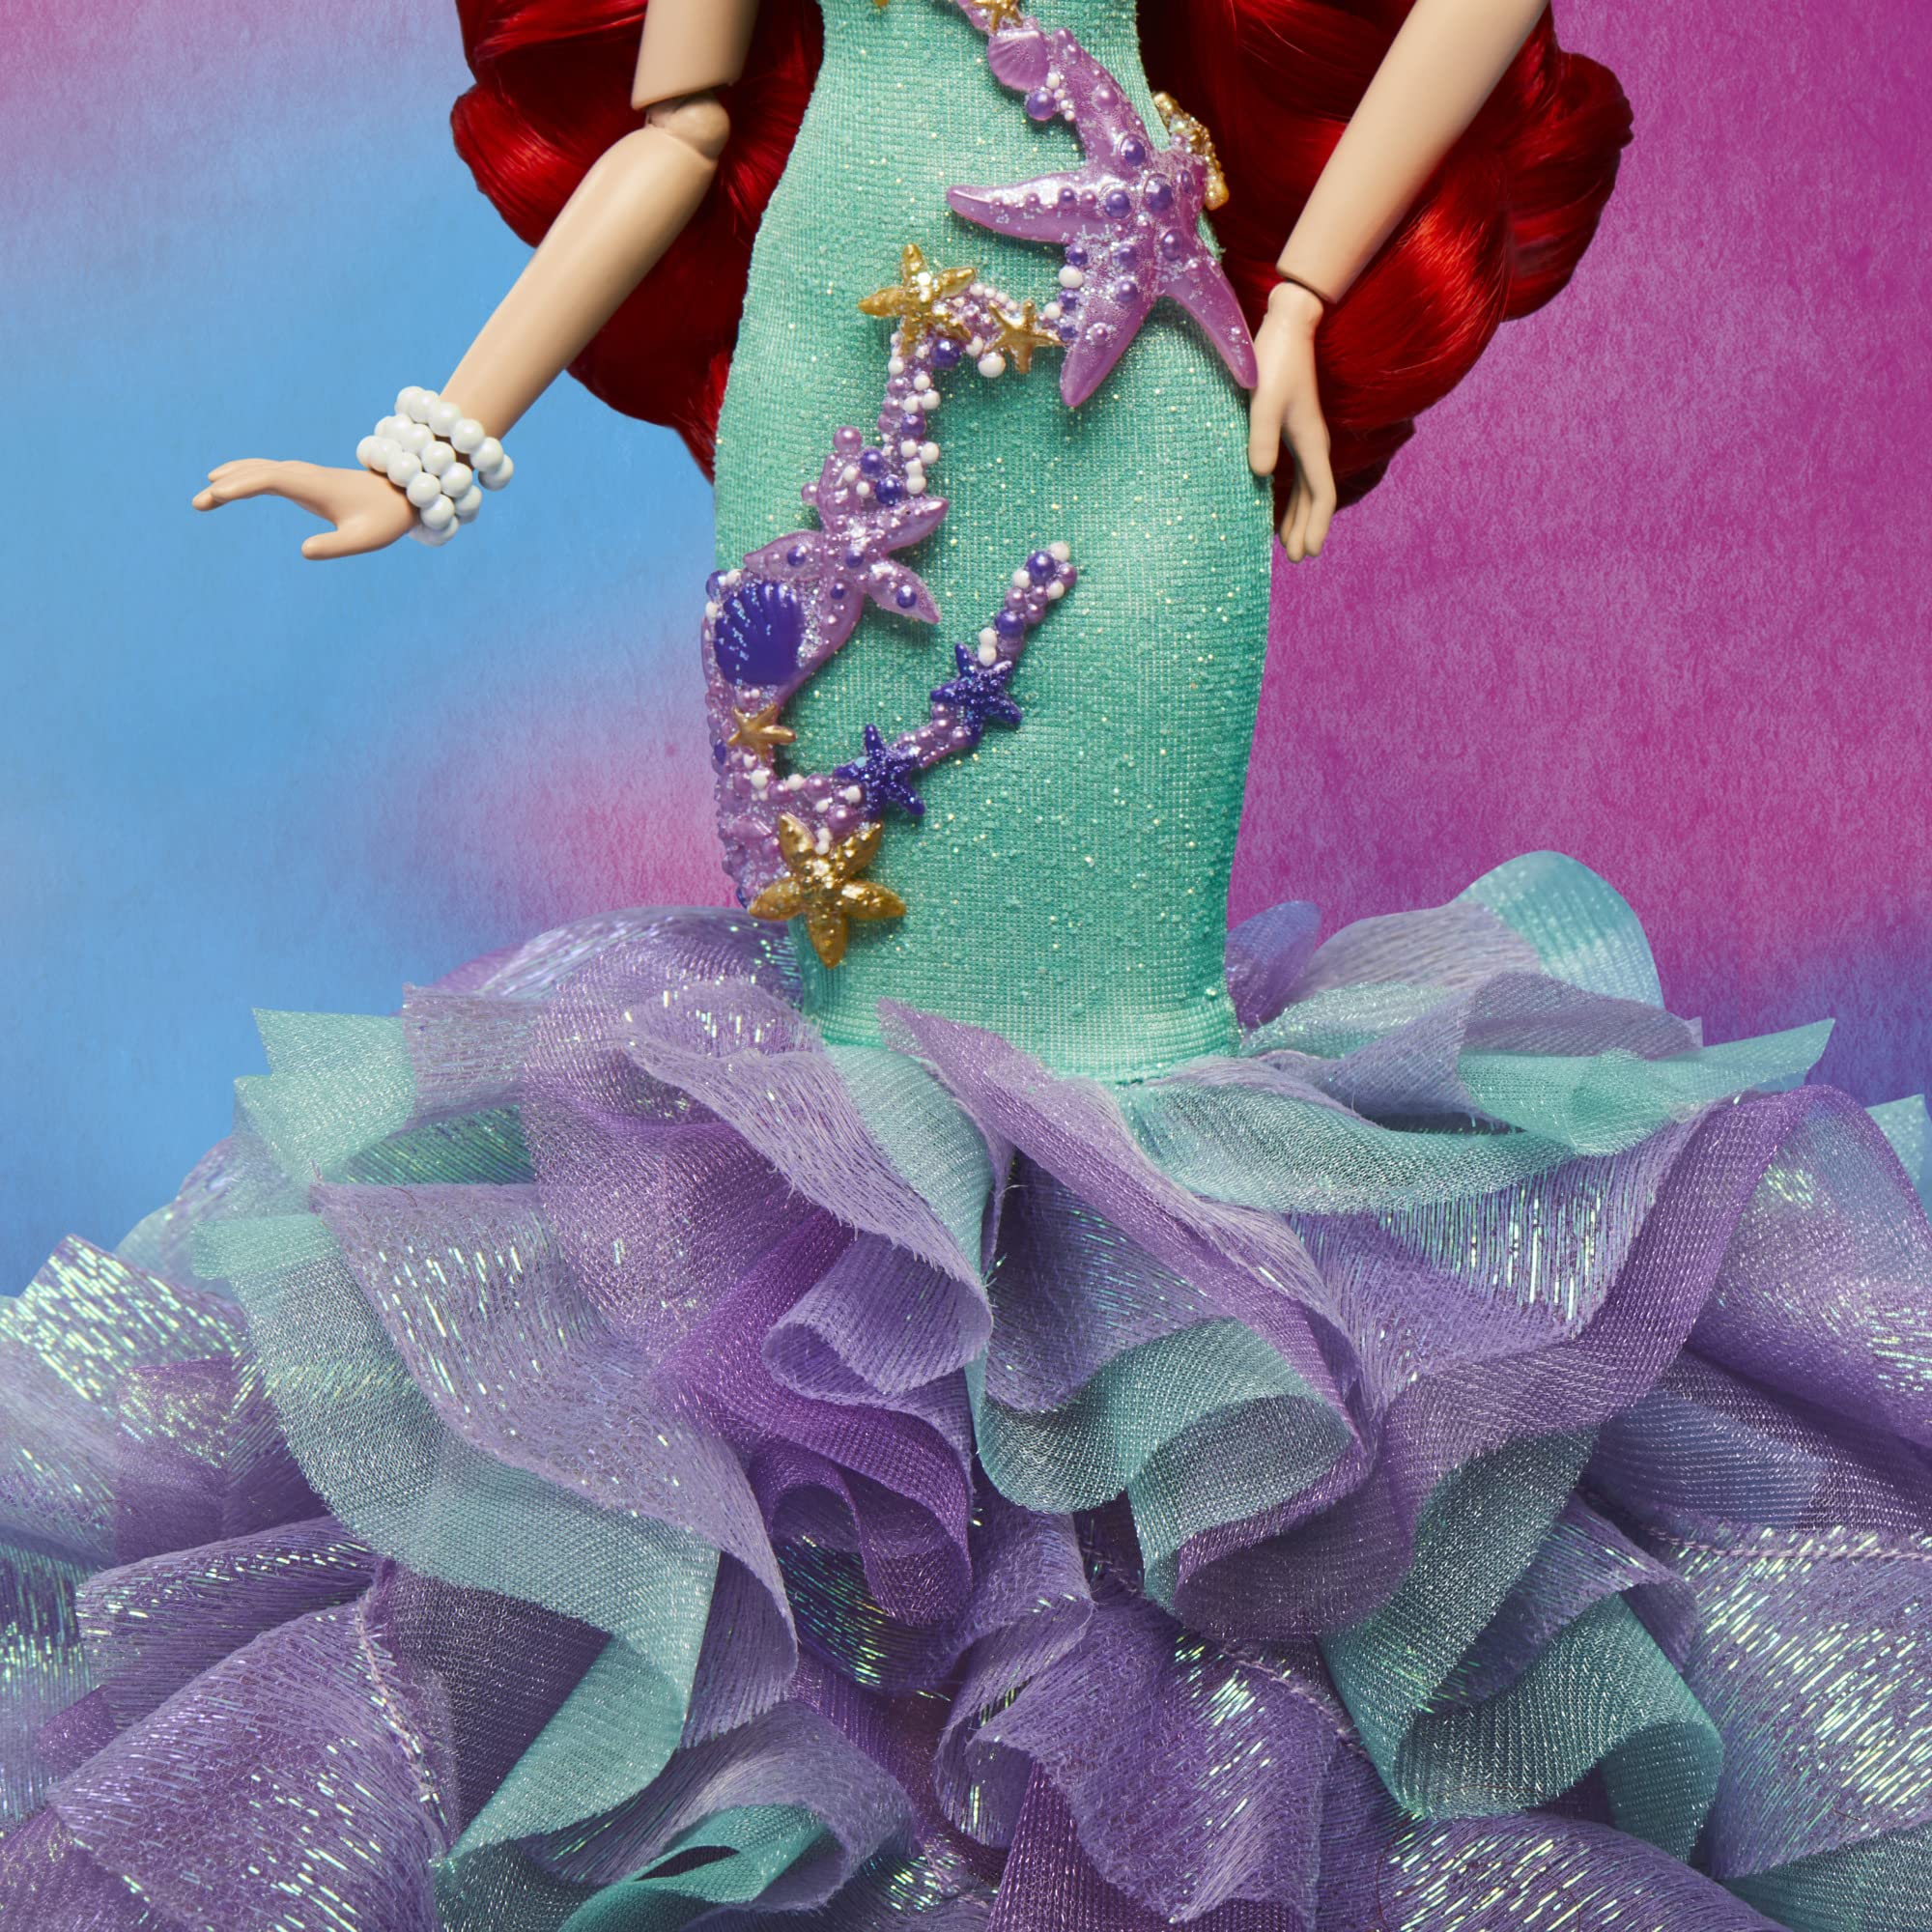 Disney Princess Style Series Ariel Fashion Doll, Deluxe Collector Doll with Accessories, The Little Mermaid Toy for Kids Ages 6 and Up